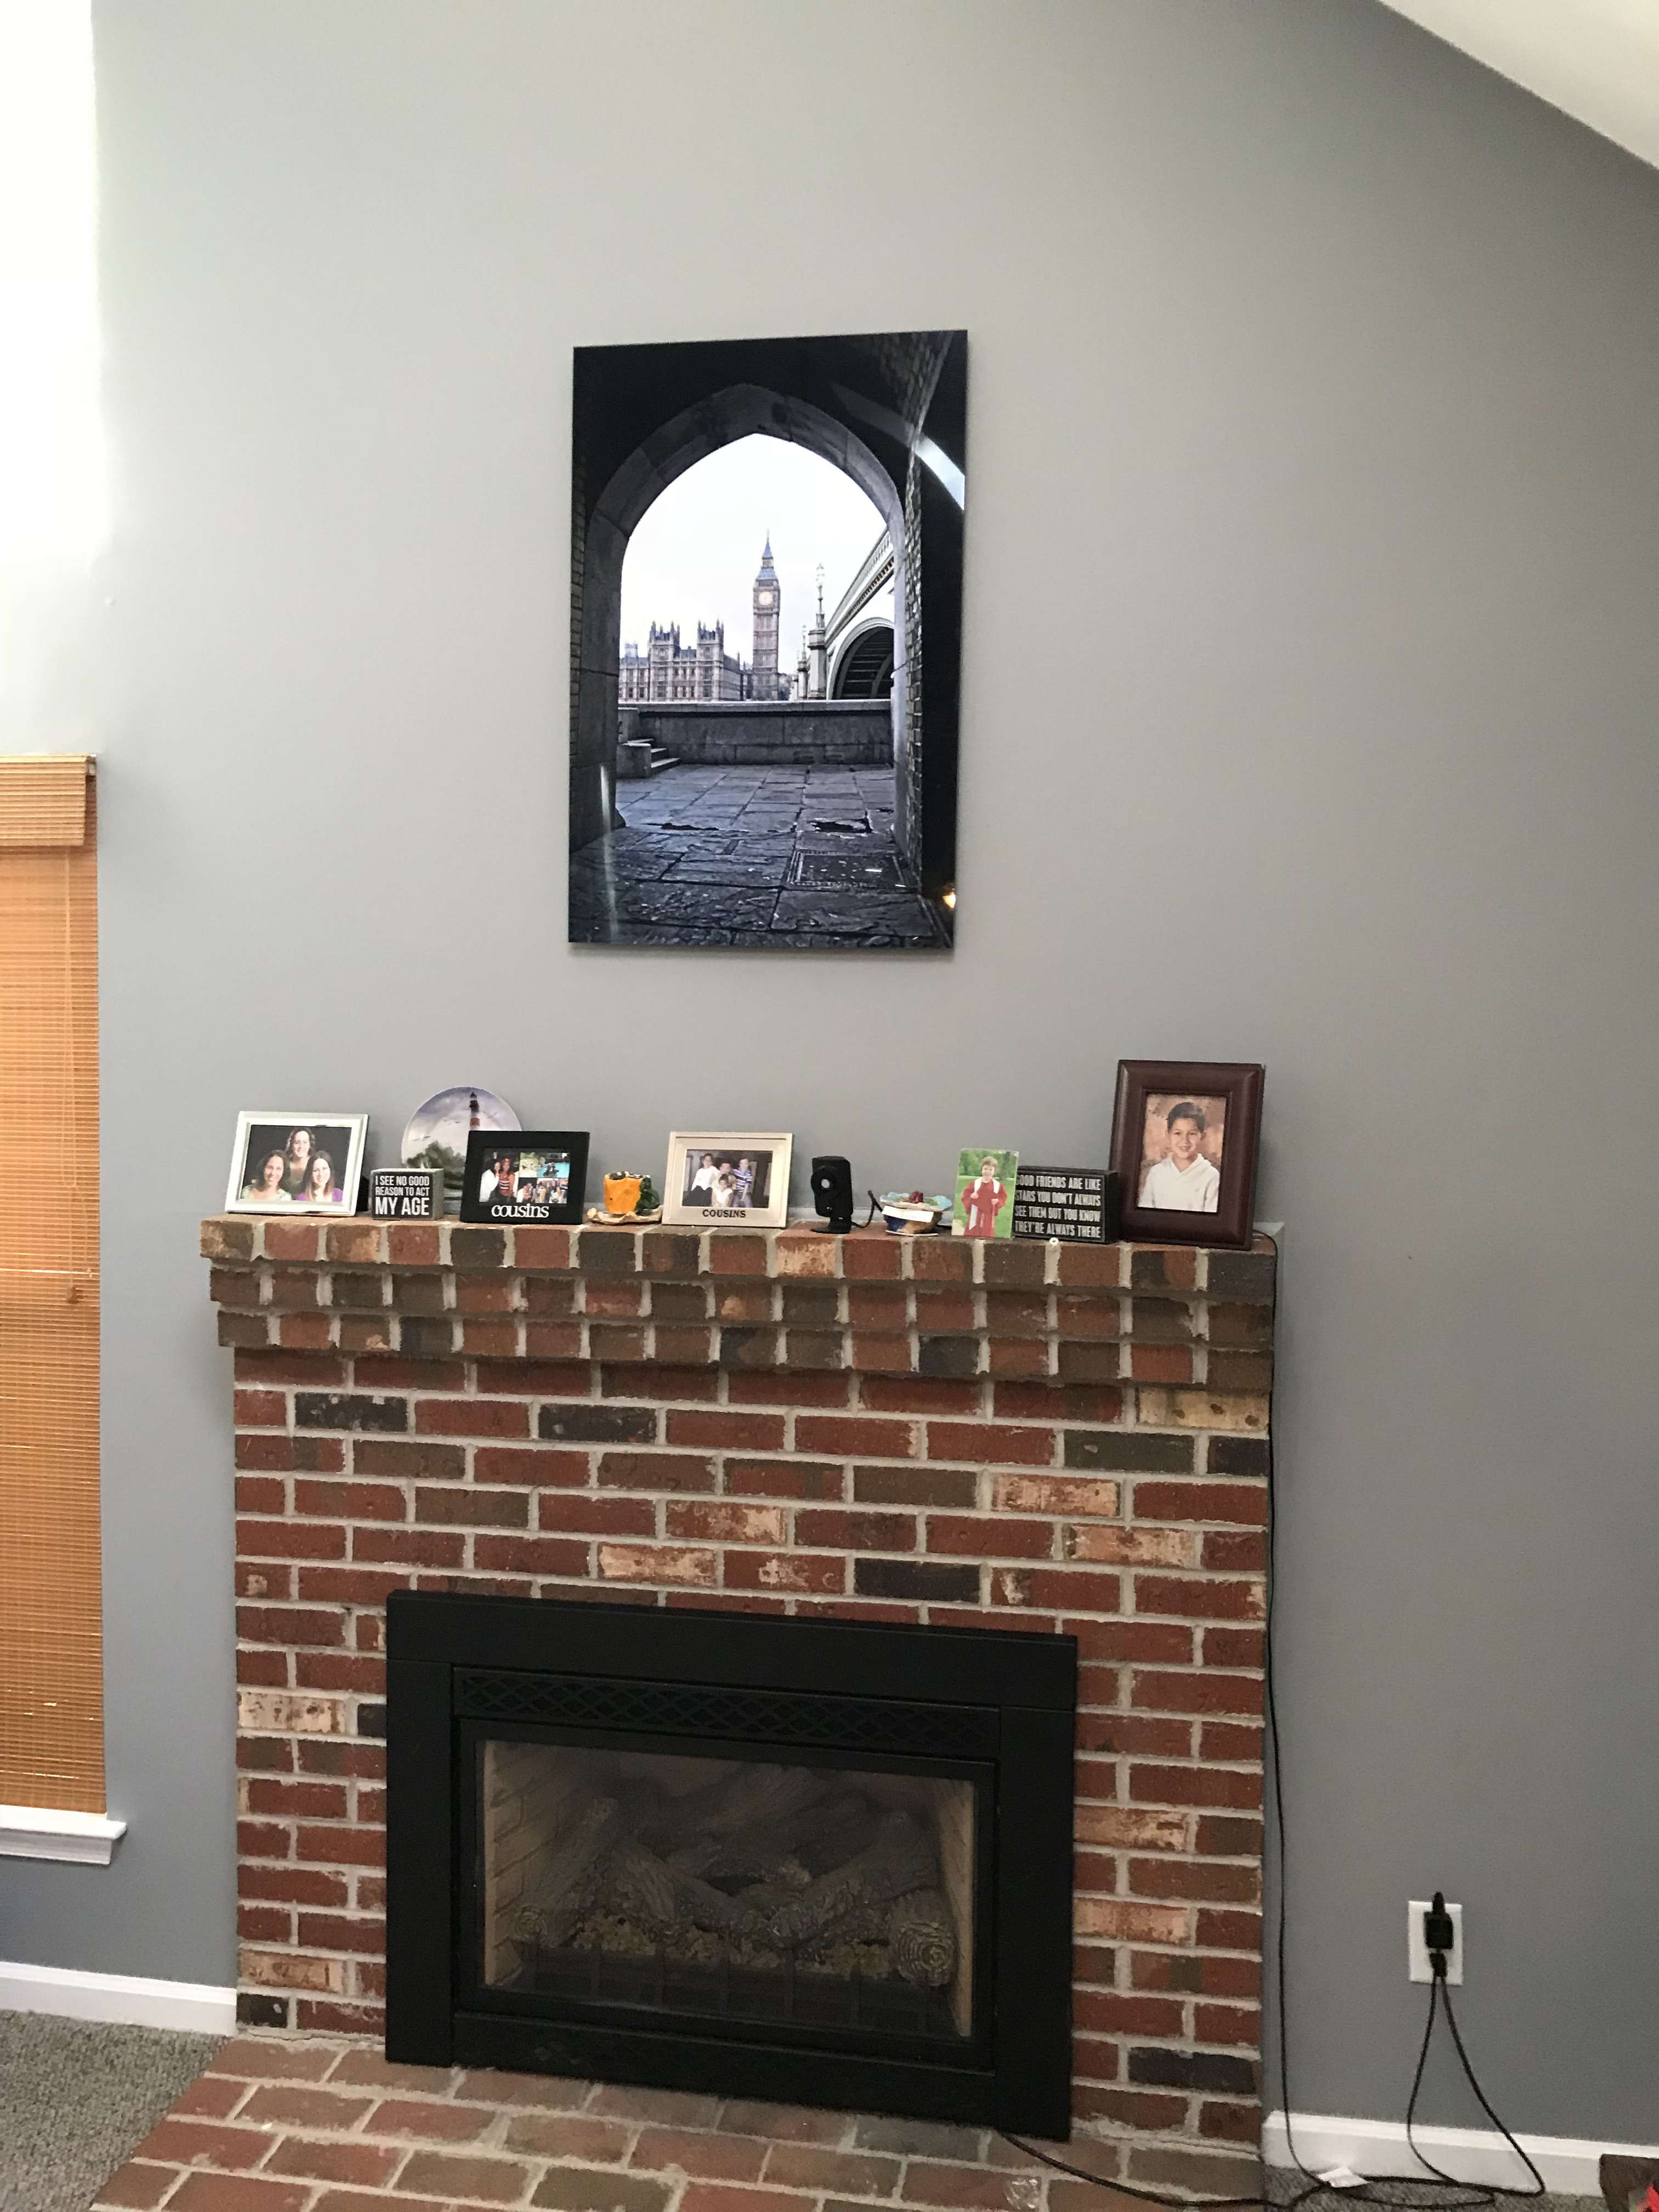 ArtisanHD customer photo contribution for TruLife™ Acrylic Face Mounting